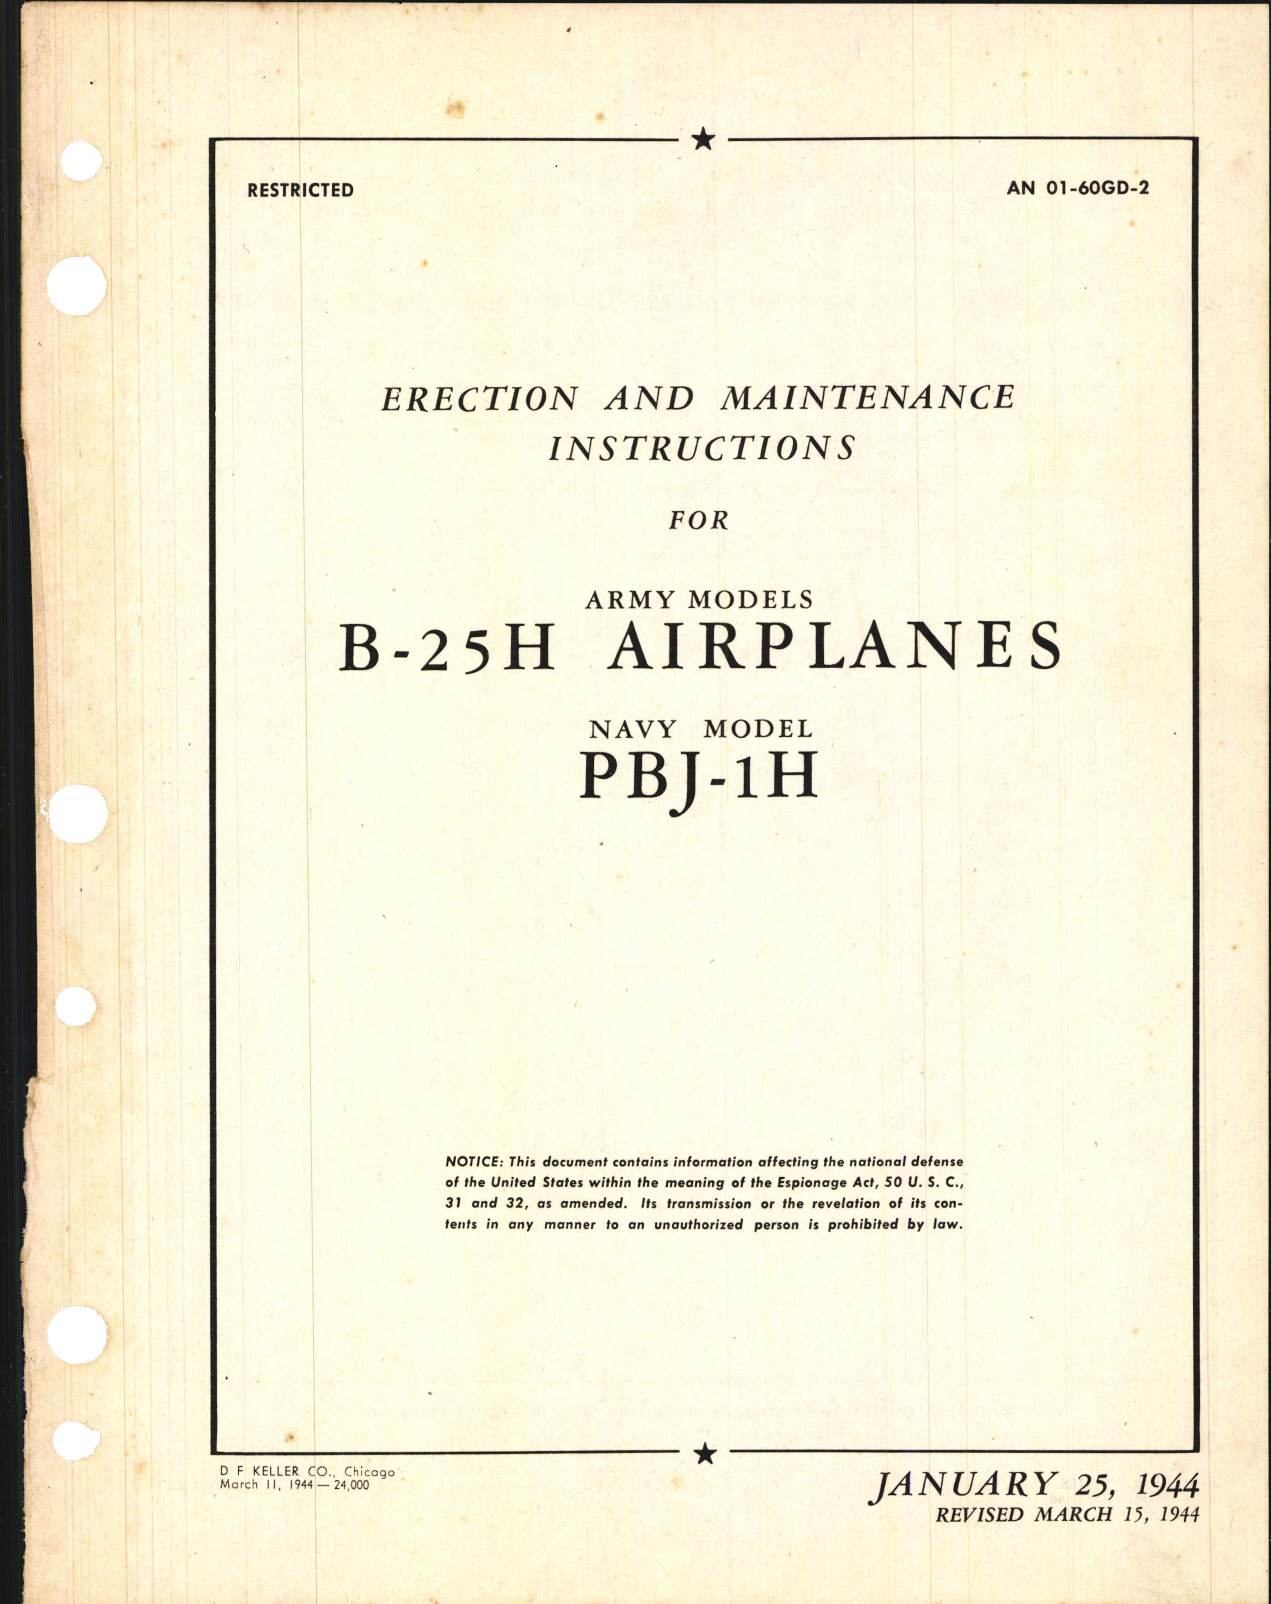 Sample page 3 from AirCorps Library document: Erection and Maintenance Instructions for B-25H and PBJ-1H Airplanes